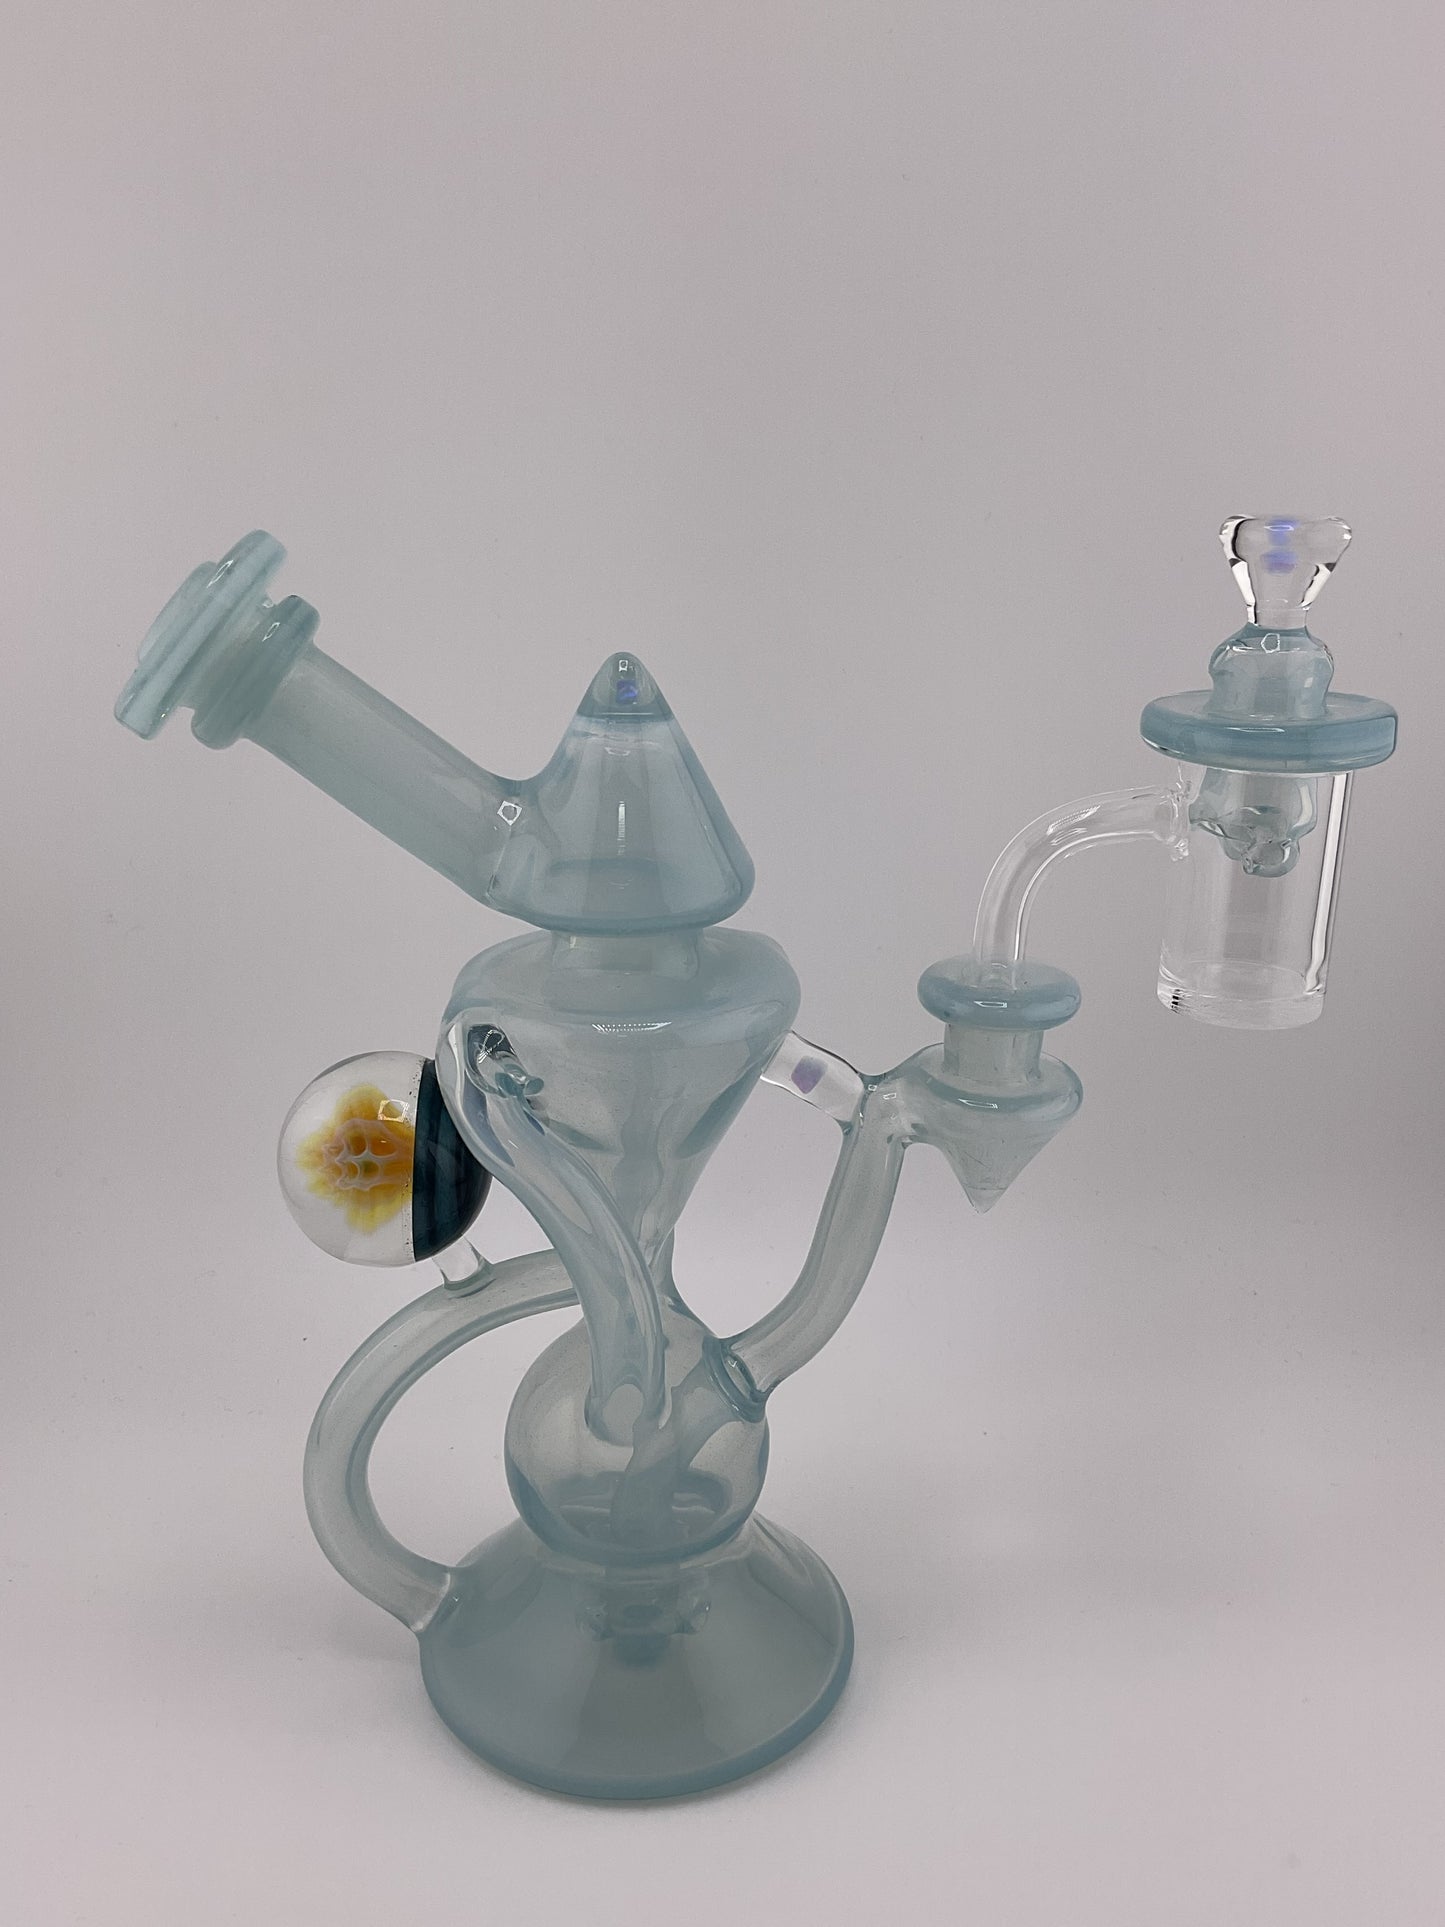 Made by Mank Heady Recycler